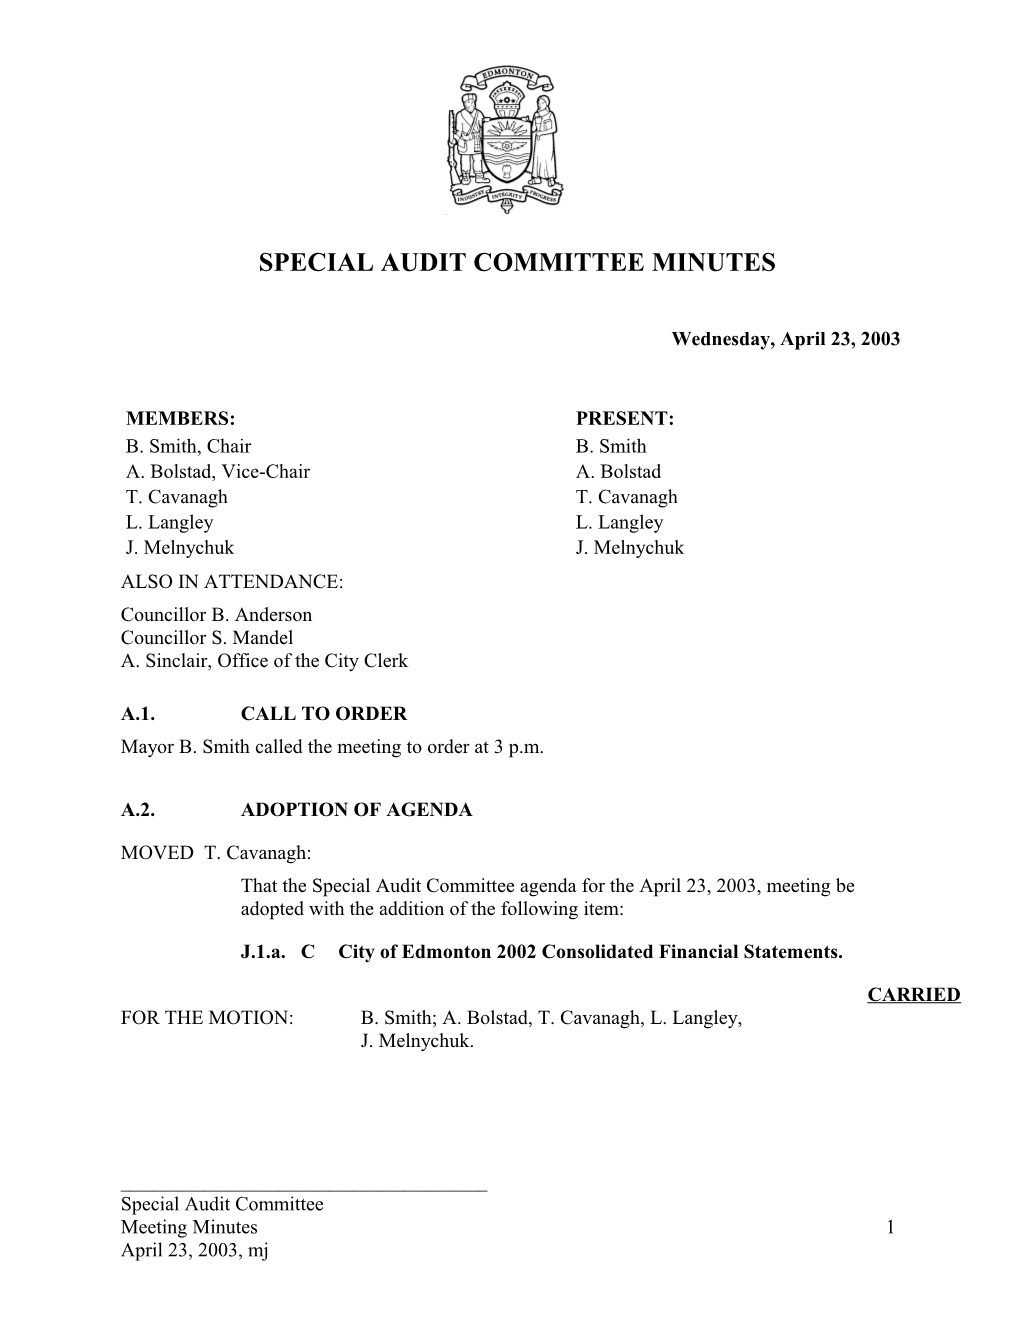 Minutes for Audit Committee April 23, 2003 Meeting